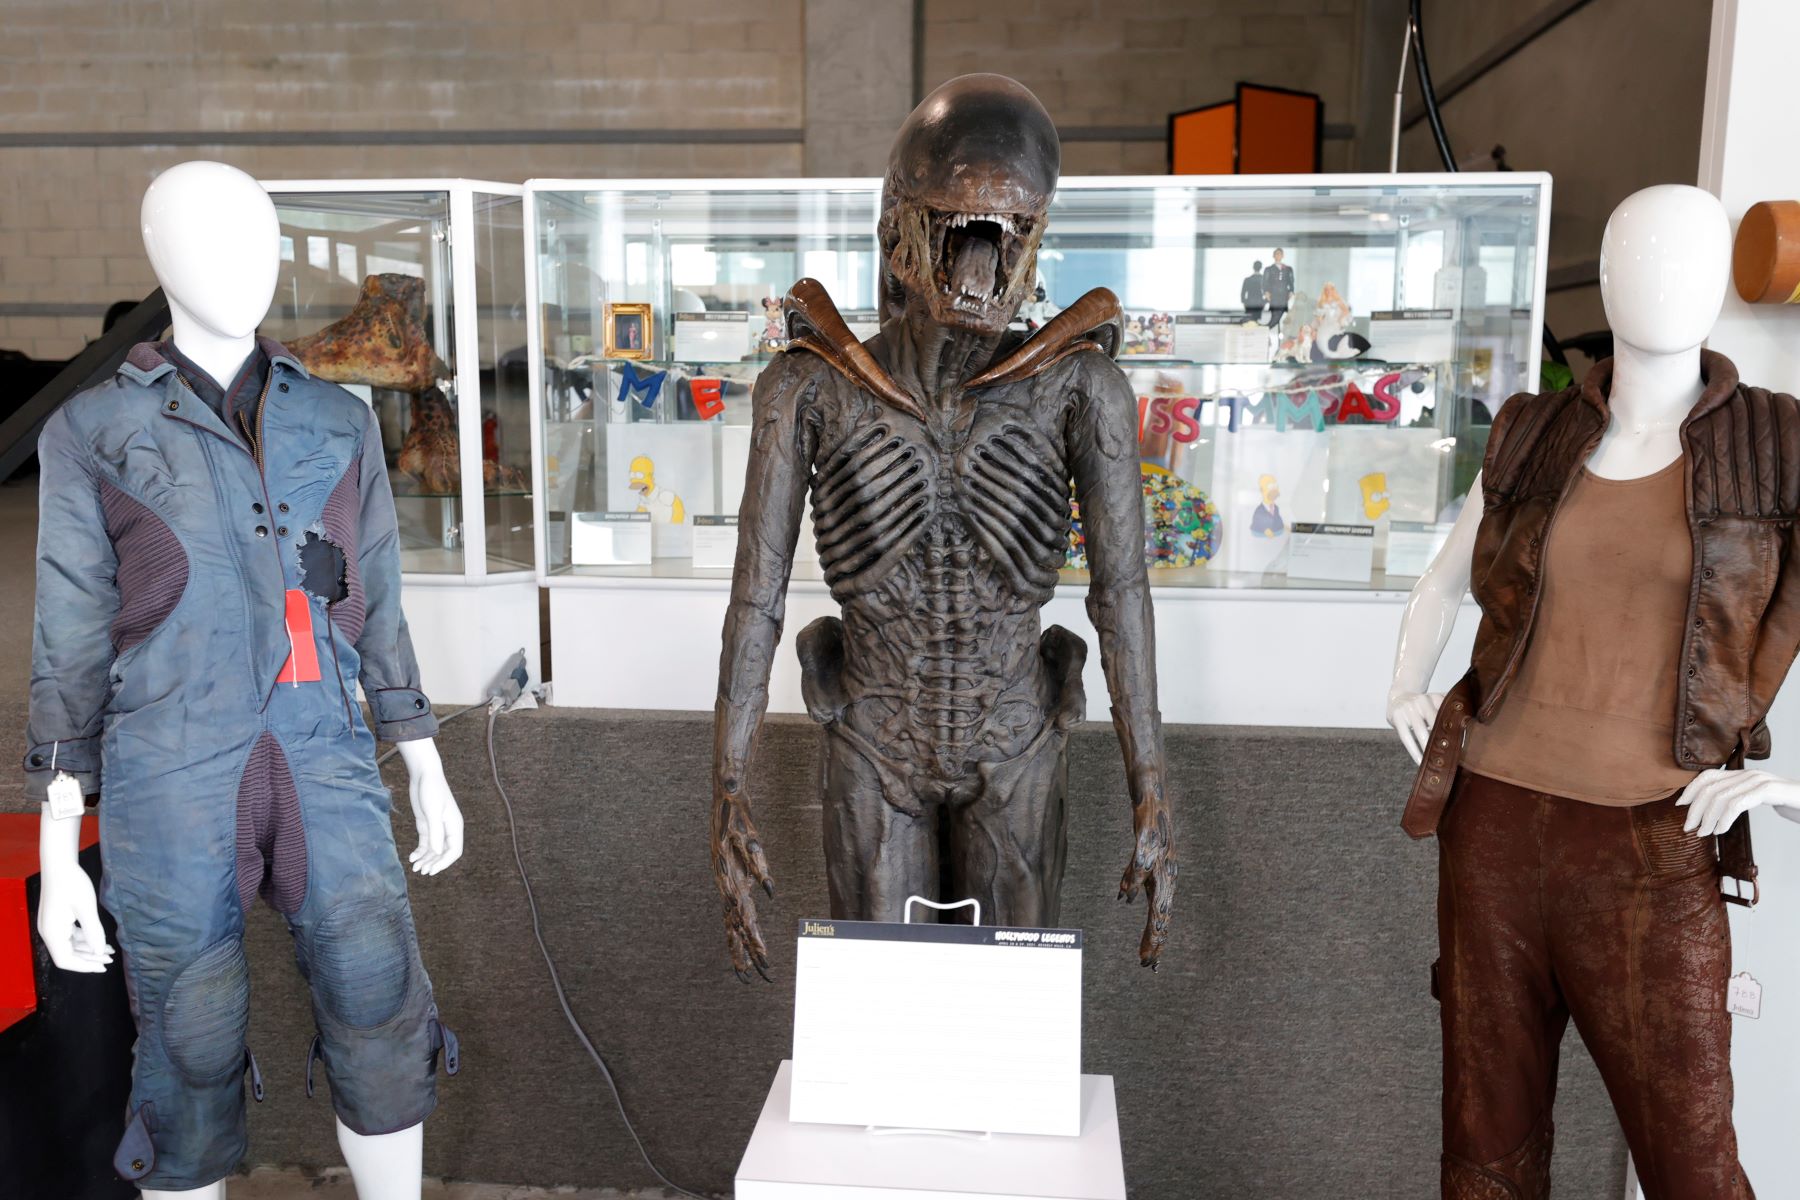 'Alien 3' outfits and props at Julien's Auctions in Beverly Hills, California